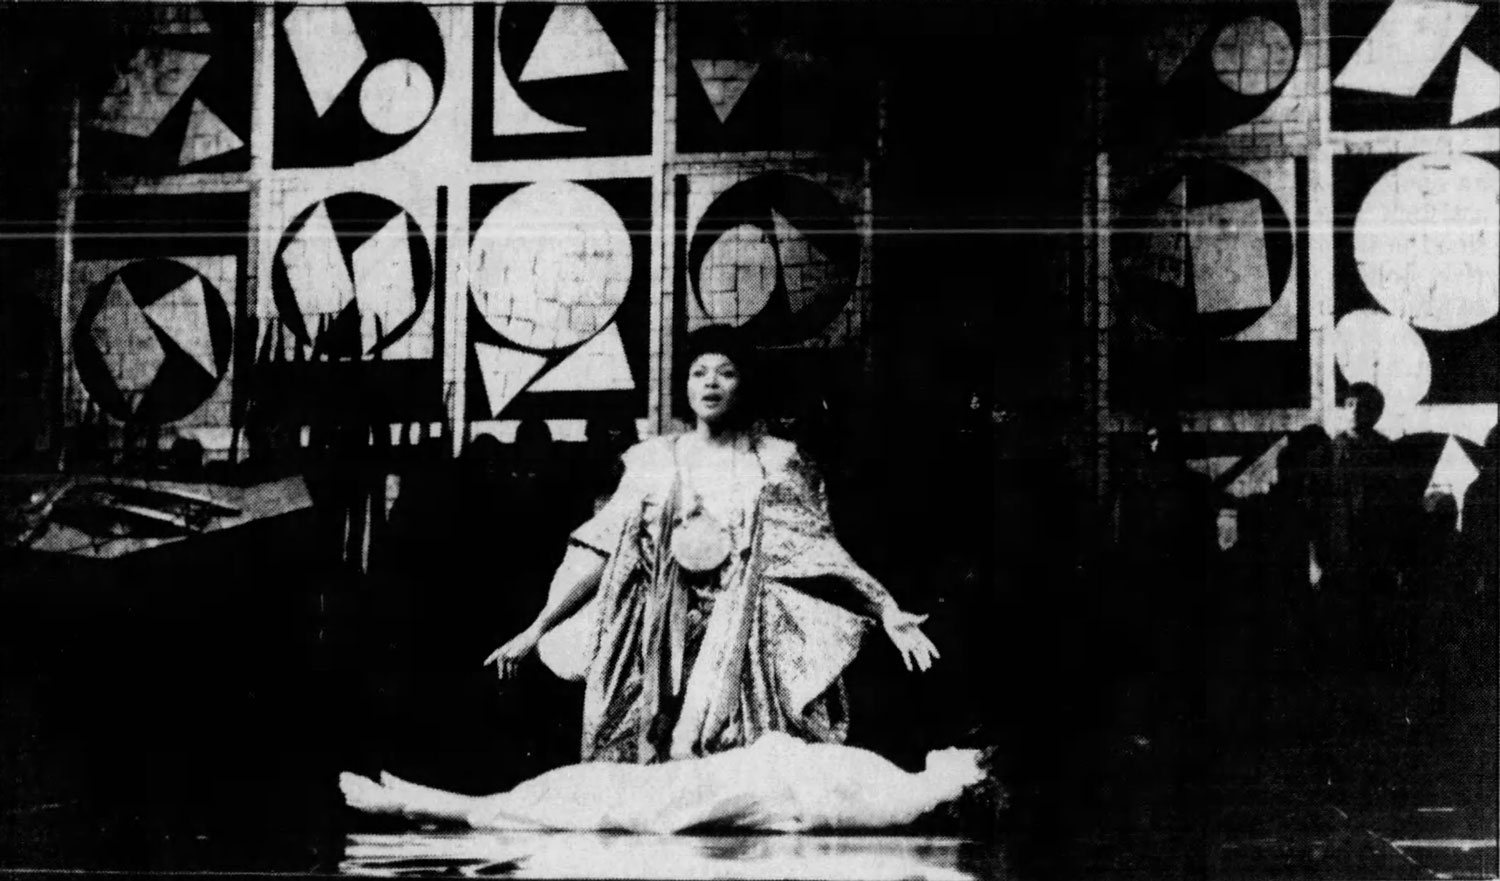 A view of the set Nevelson created for Orfeo ed Euridice, as seen in a review of the production in the St Louis Post Dispatch on June 9, 1984.